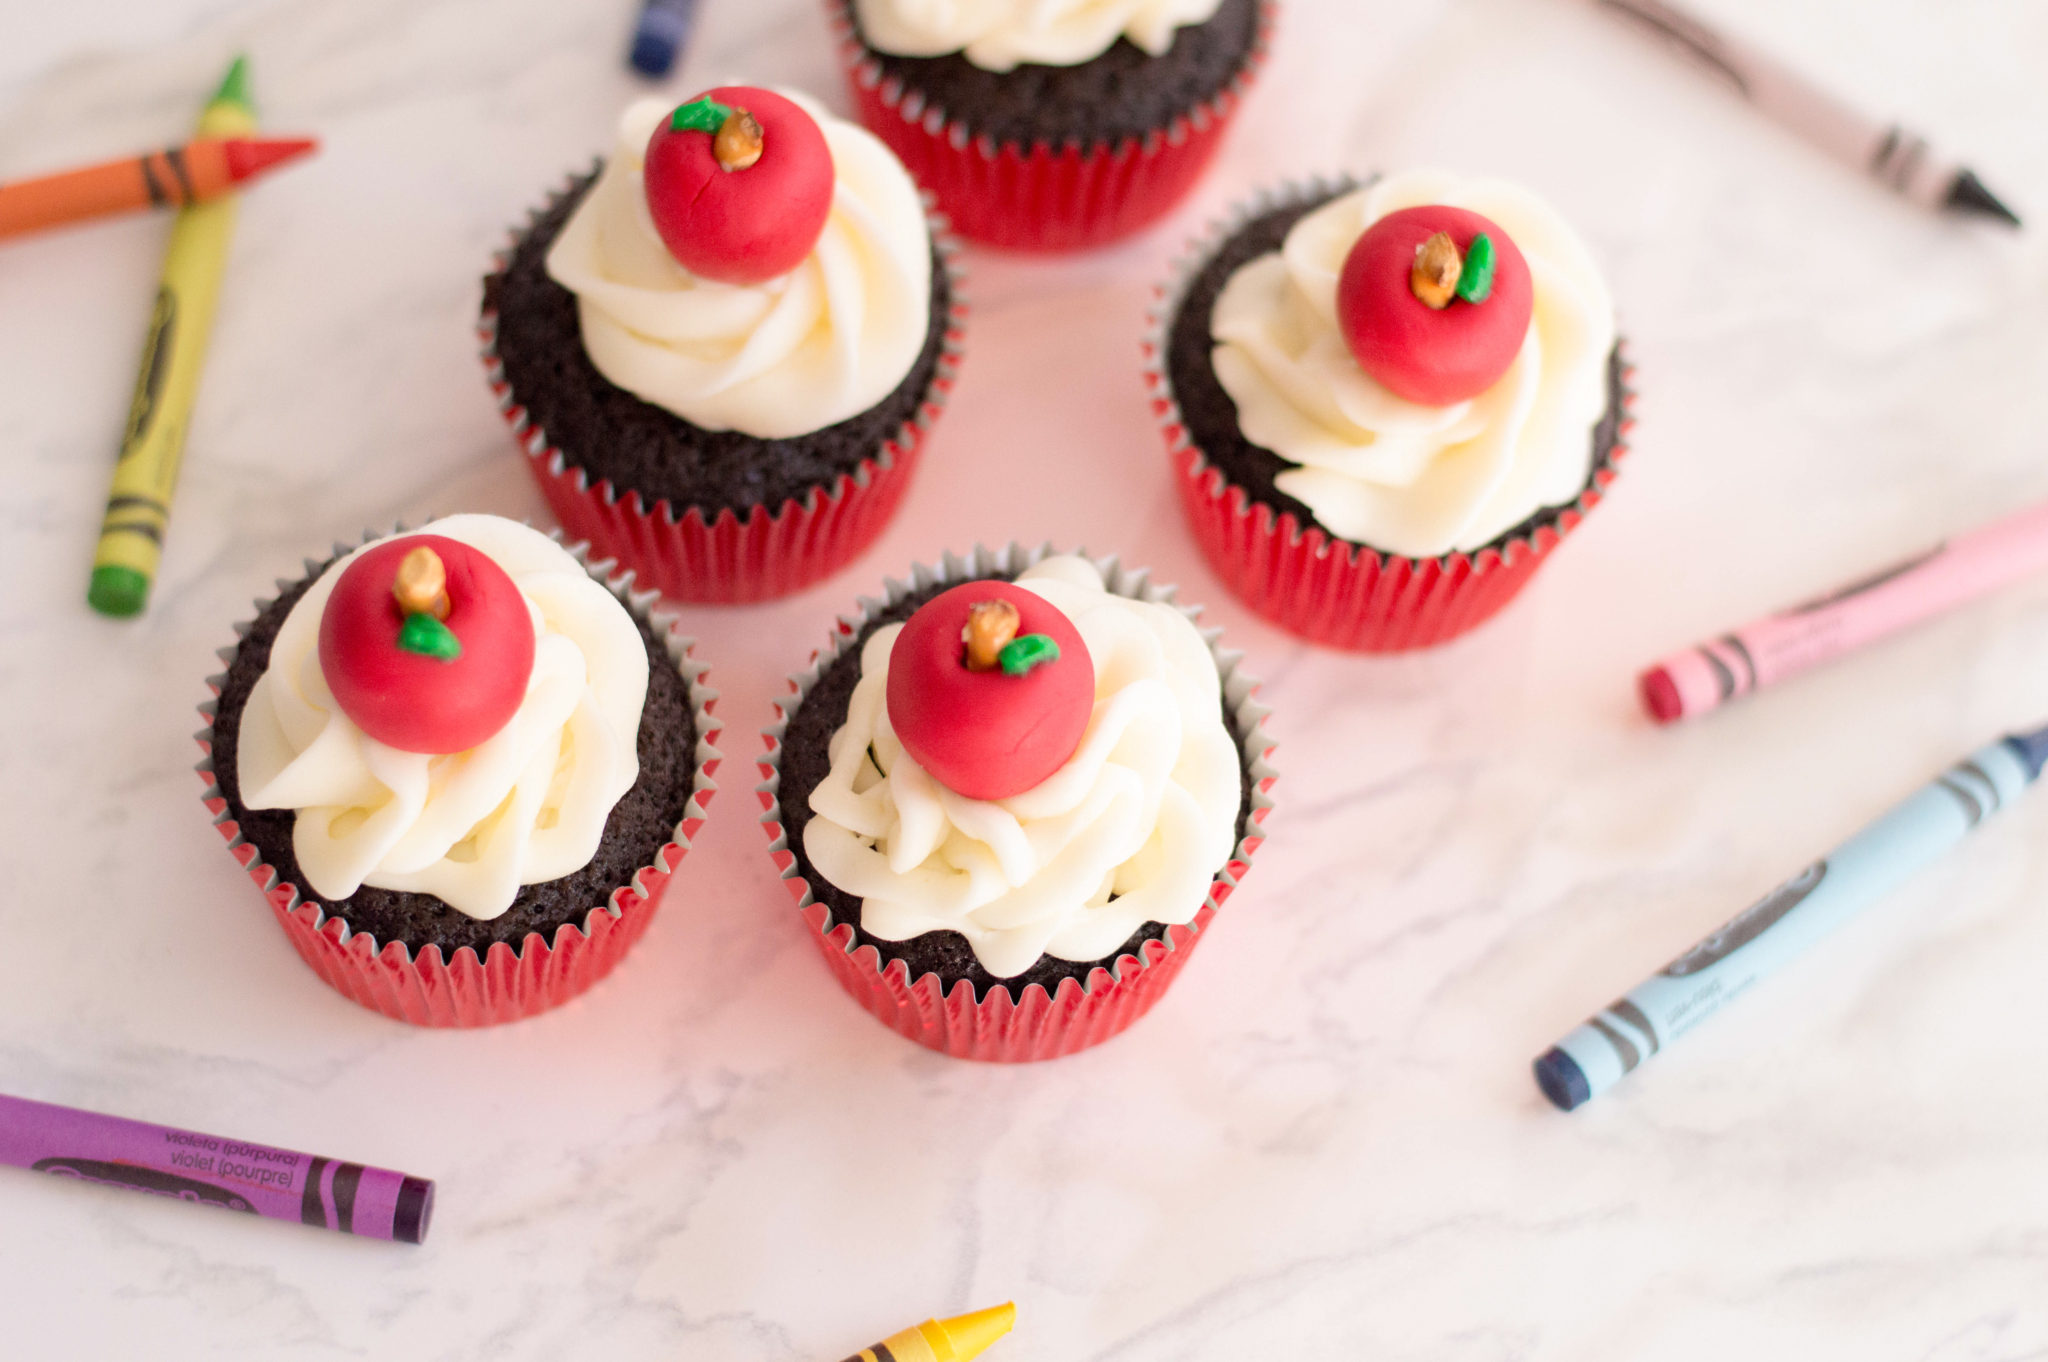 Delicious Back-To-School Chocolate Cupcakes